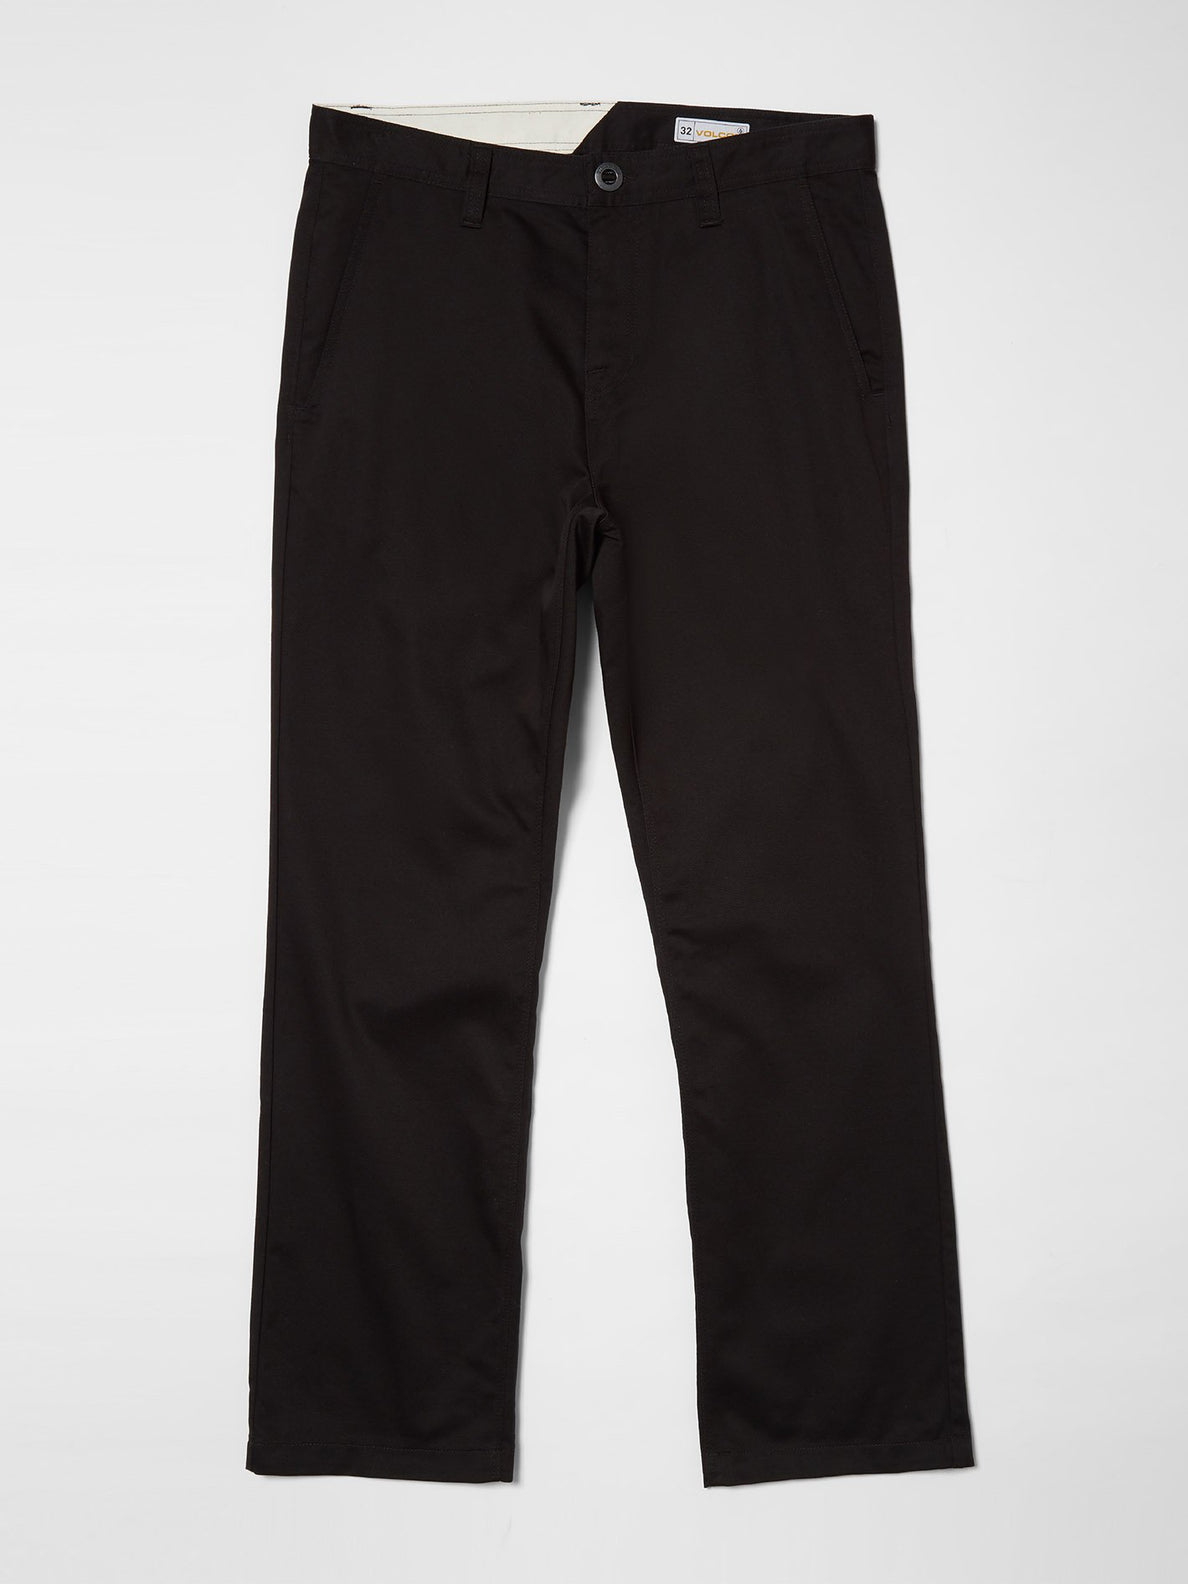 Substance Chino Pant - Black (A1112104_BLK) [1]